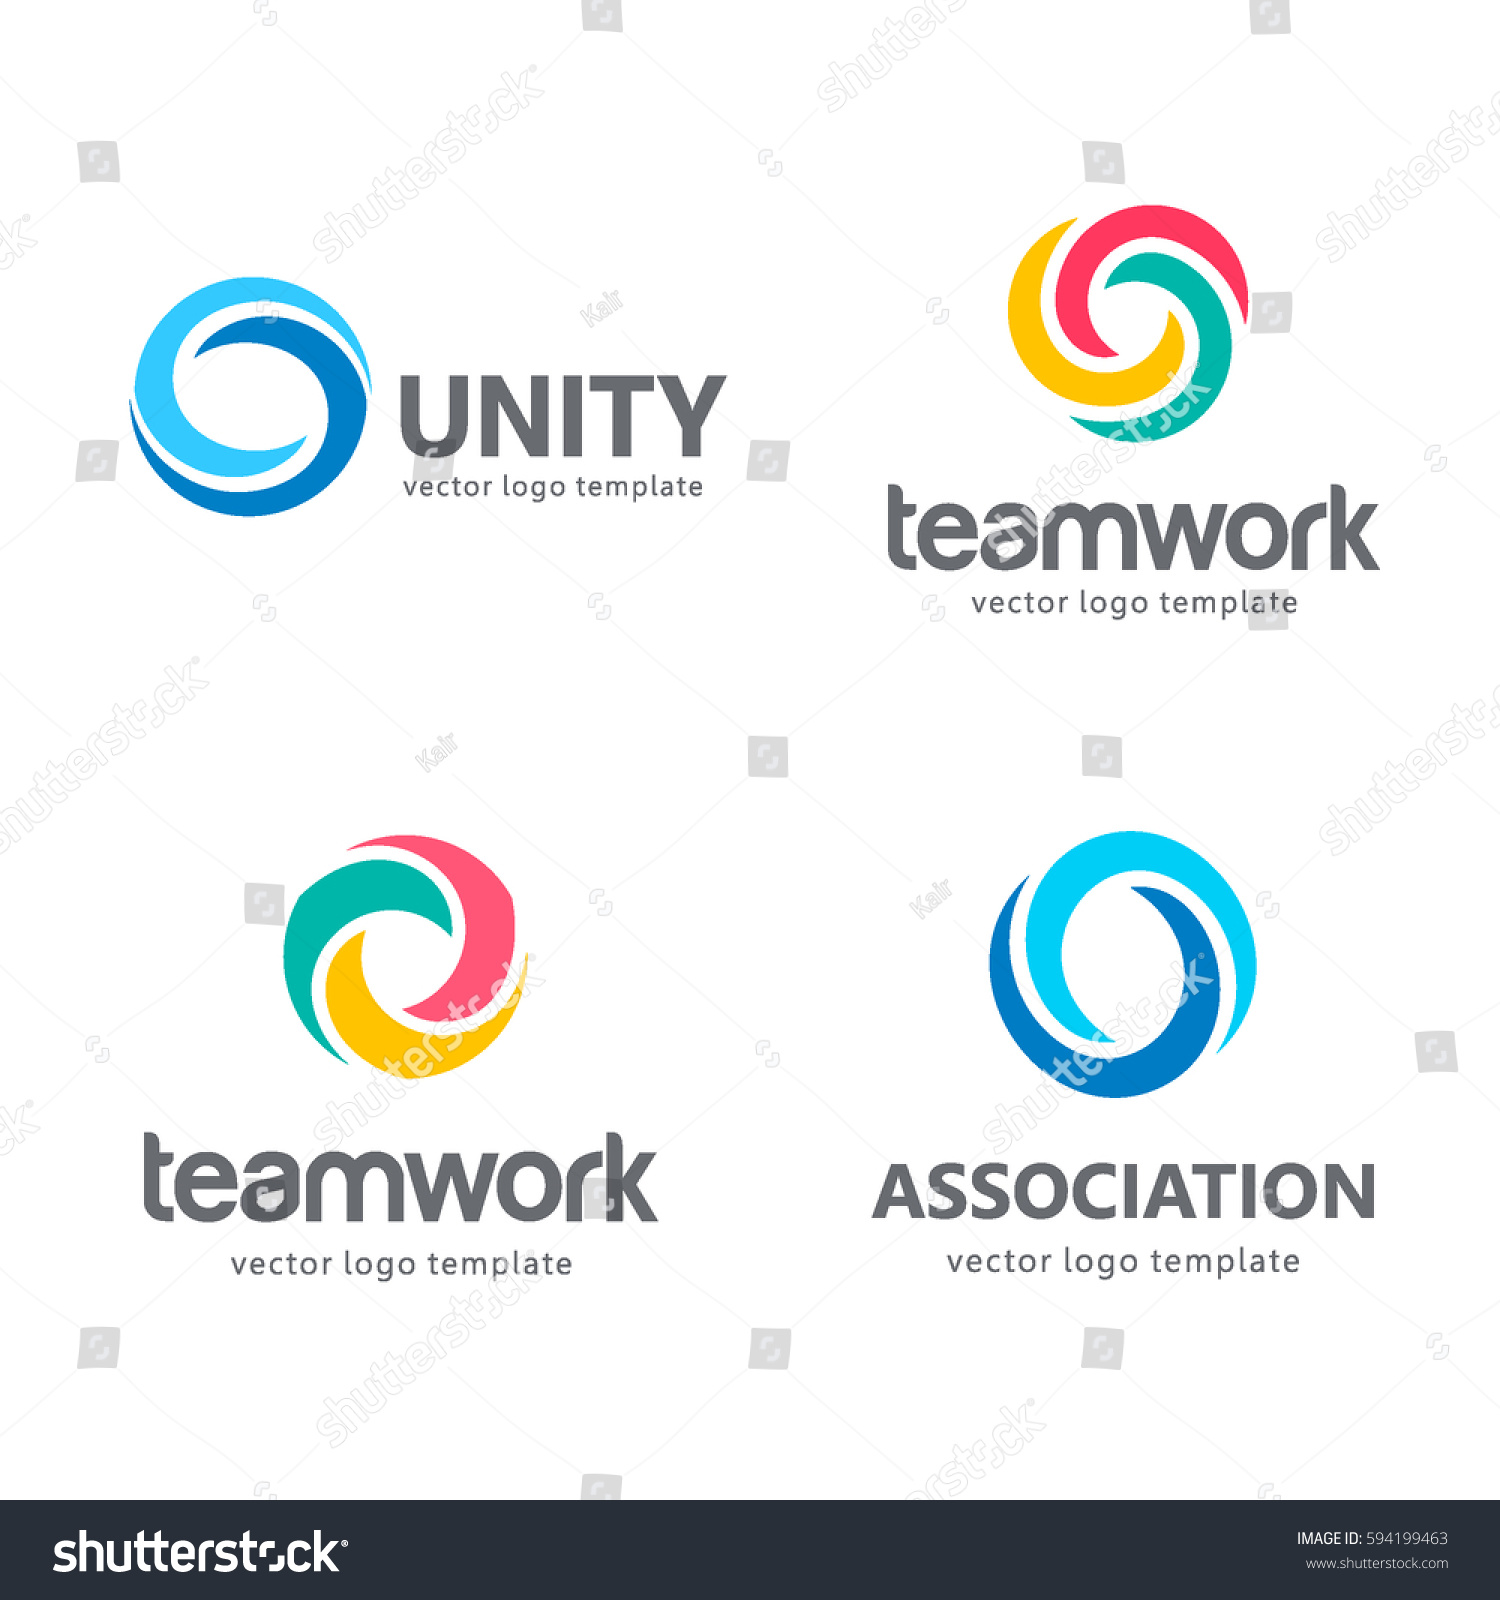 Collection of vector logos for your business. Association, Alliance, Unity, Team Work #594199463